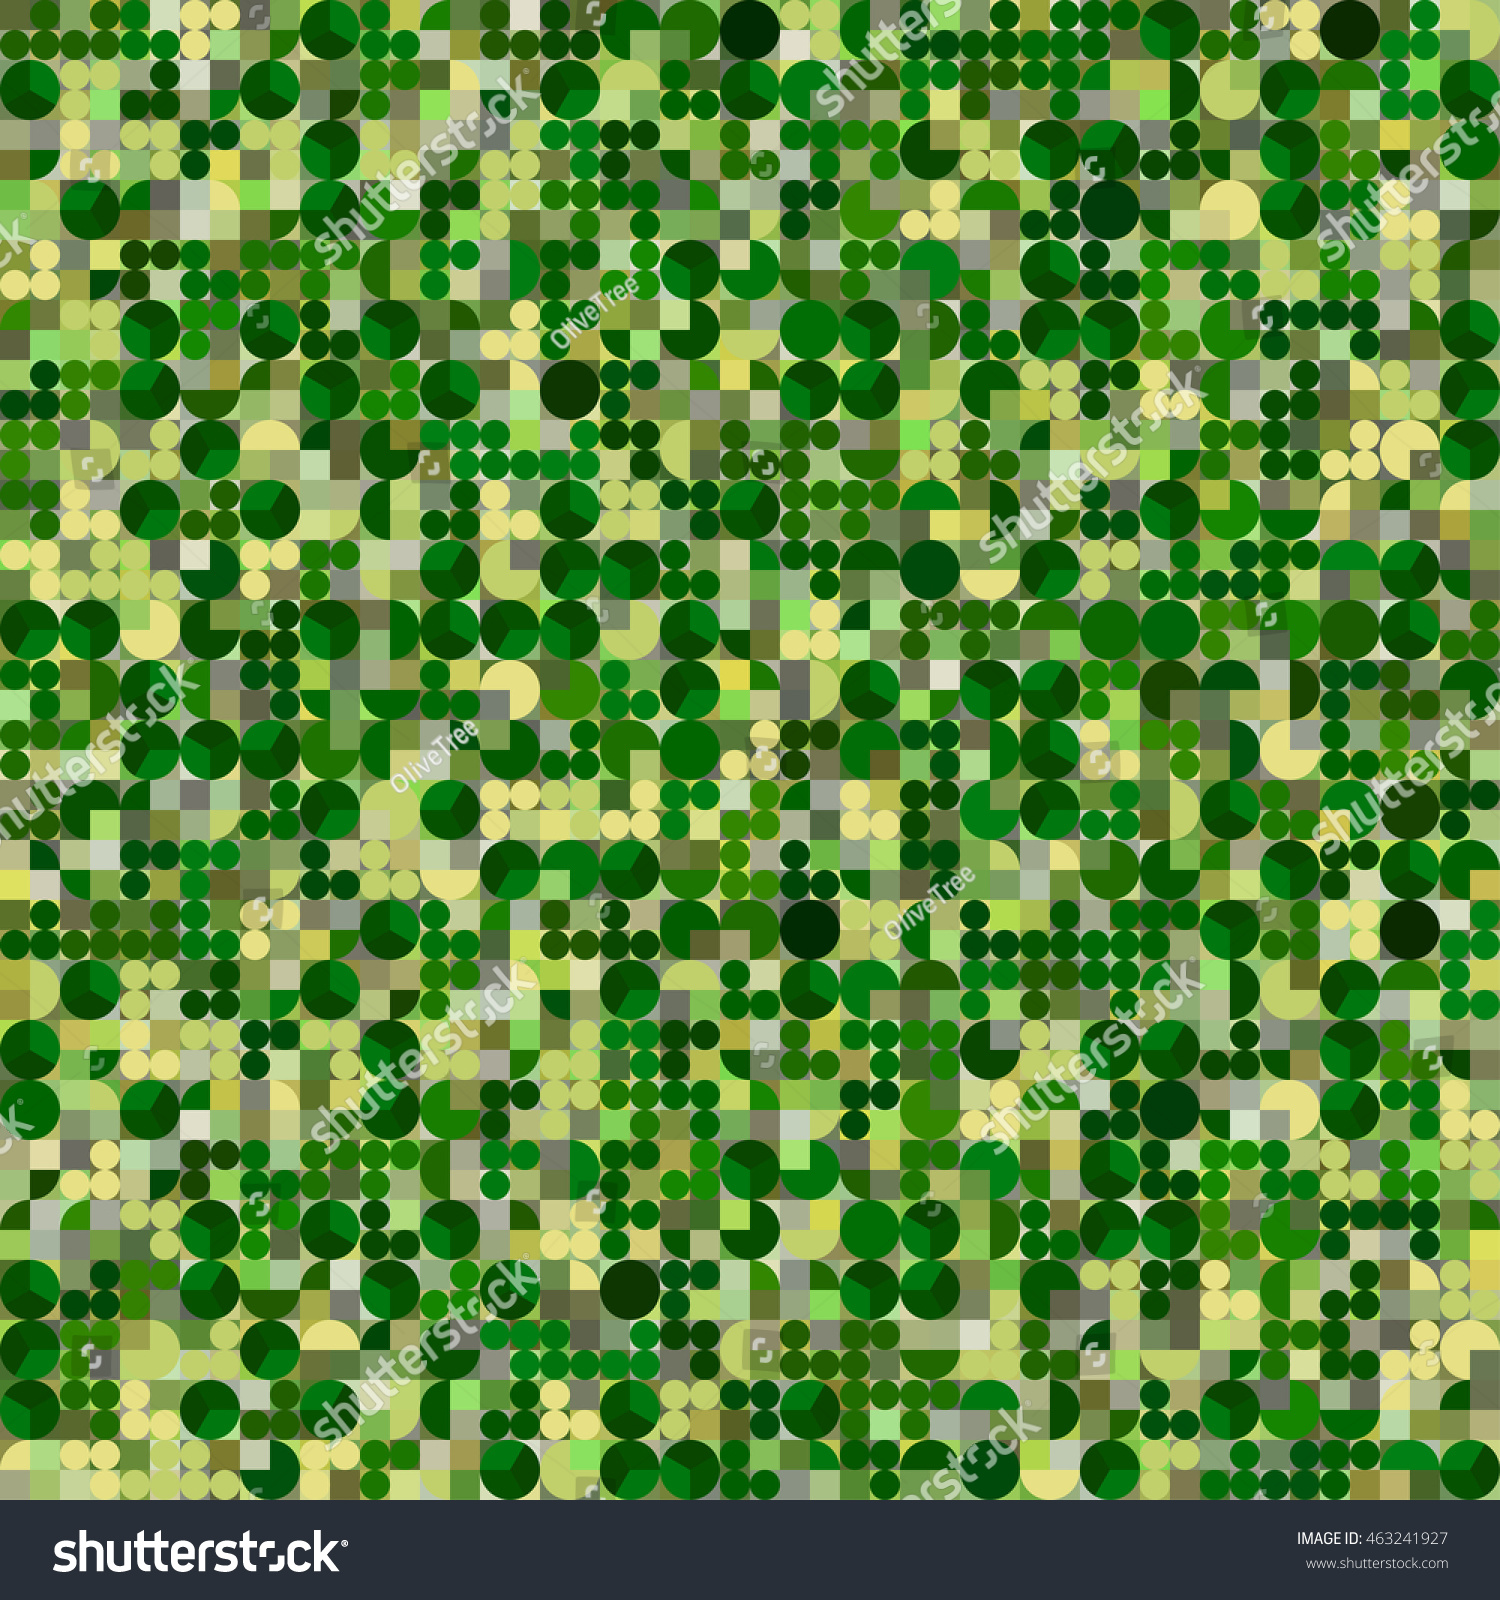 SVG of Center-pivot irrigation circular fields. Agricultural seamless pattern. Generative vector texture looking like aerial or satellite imagery svg